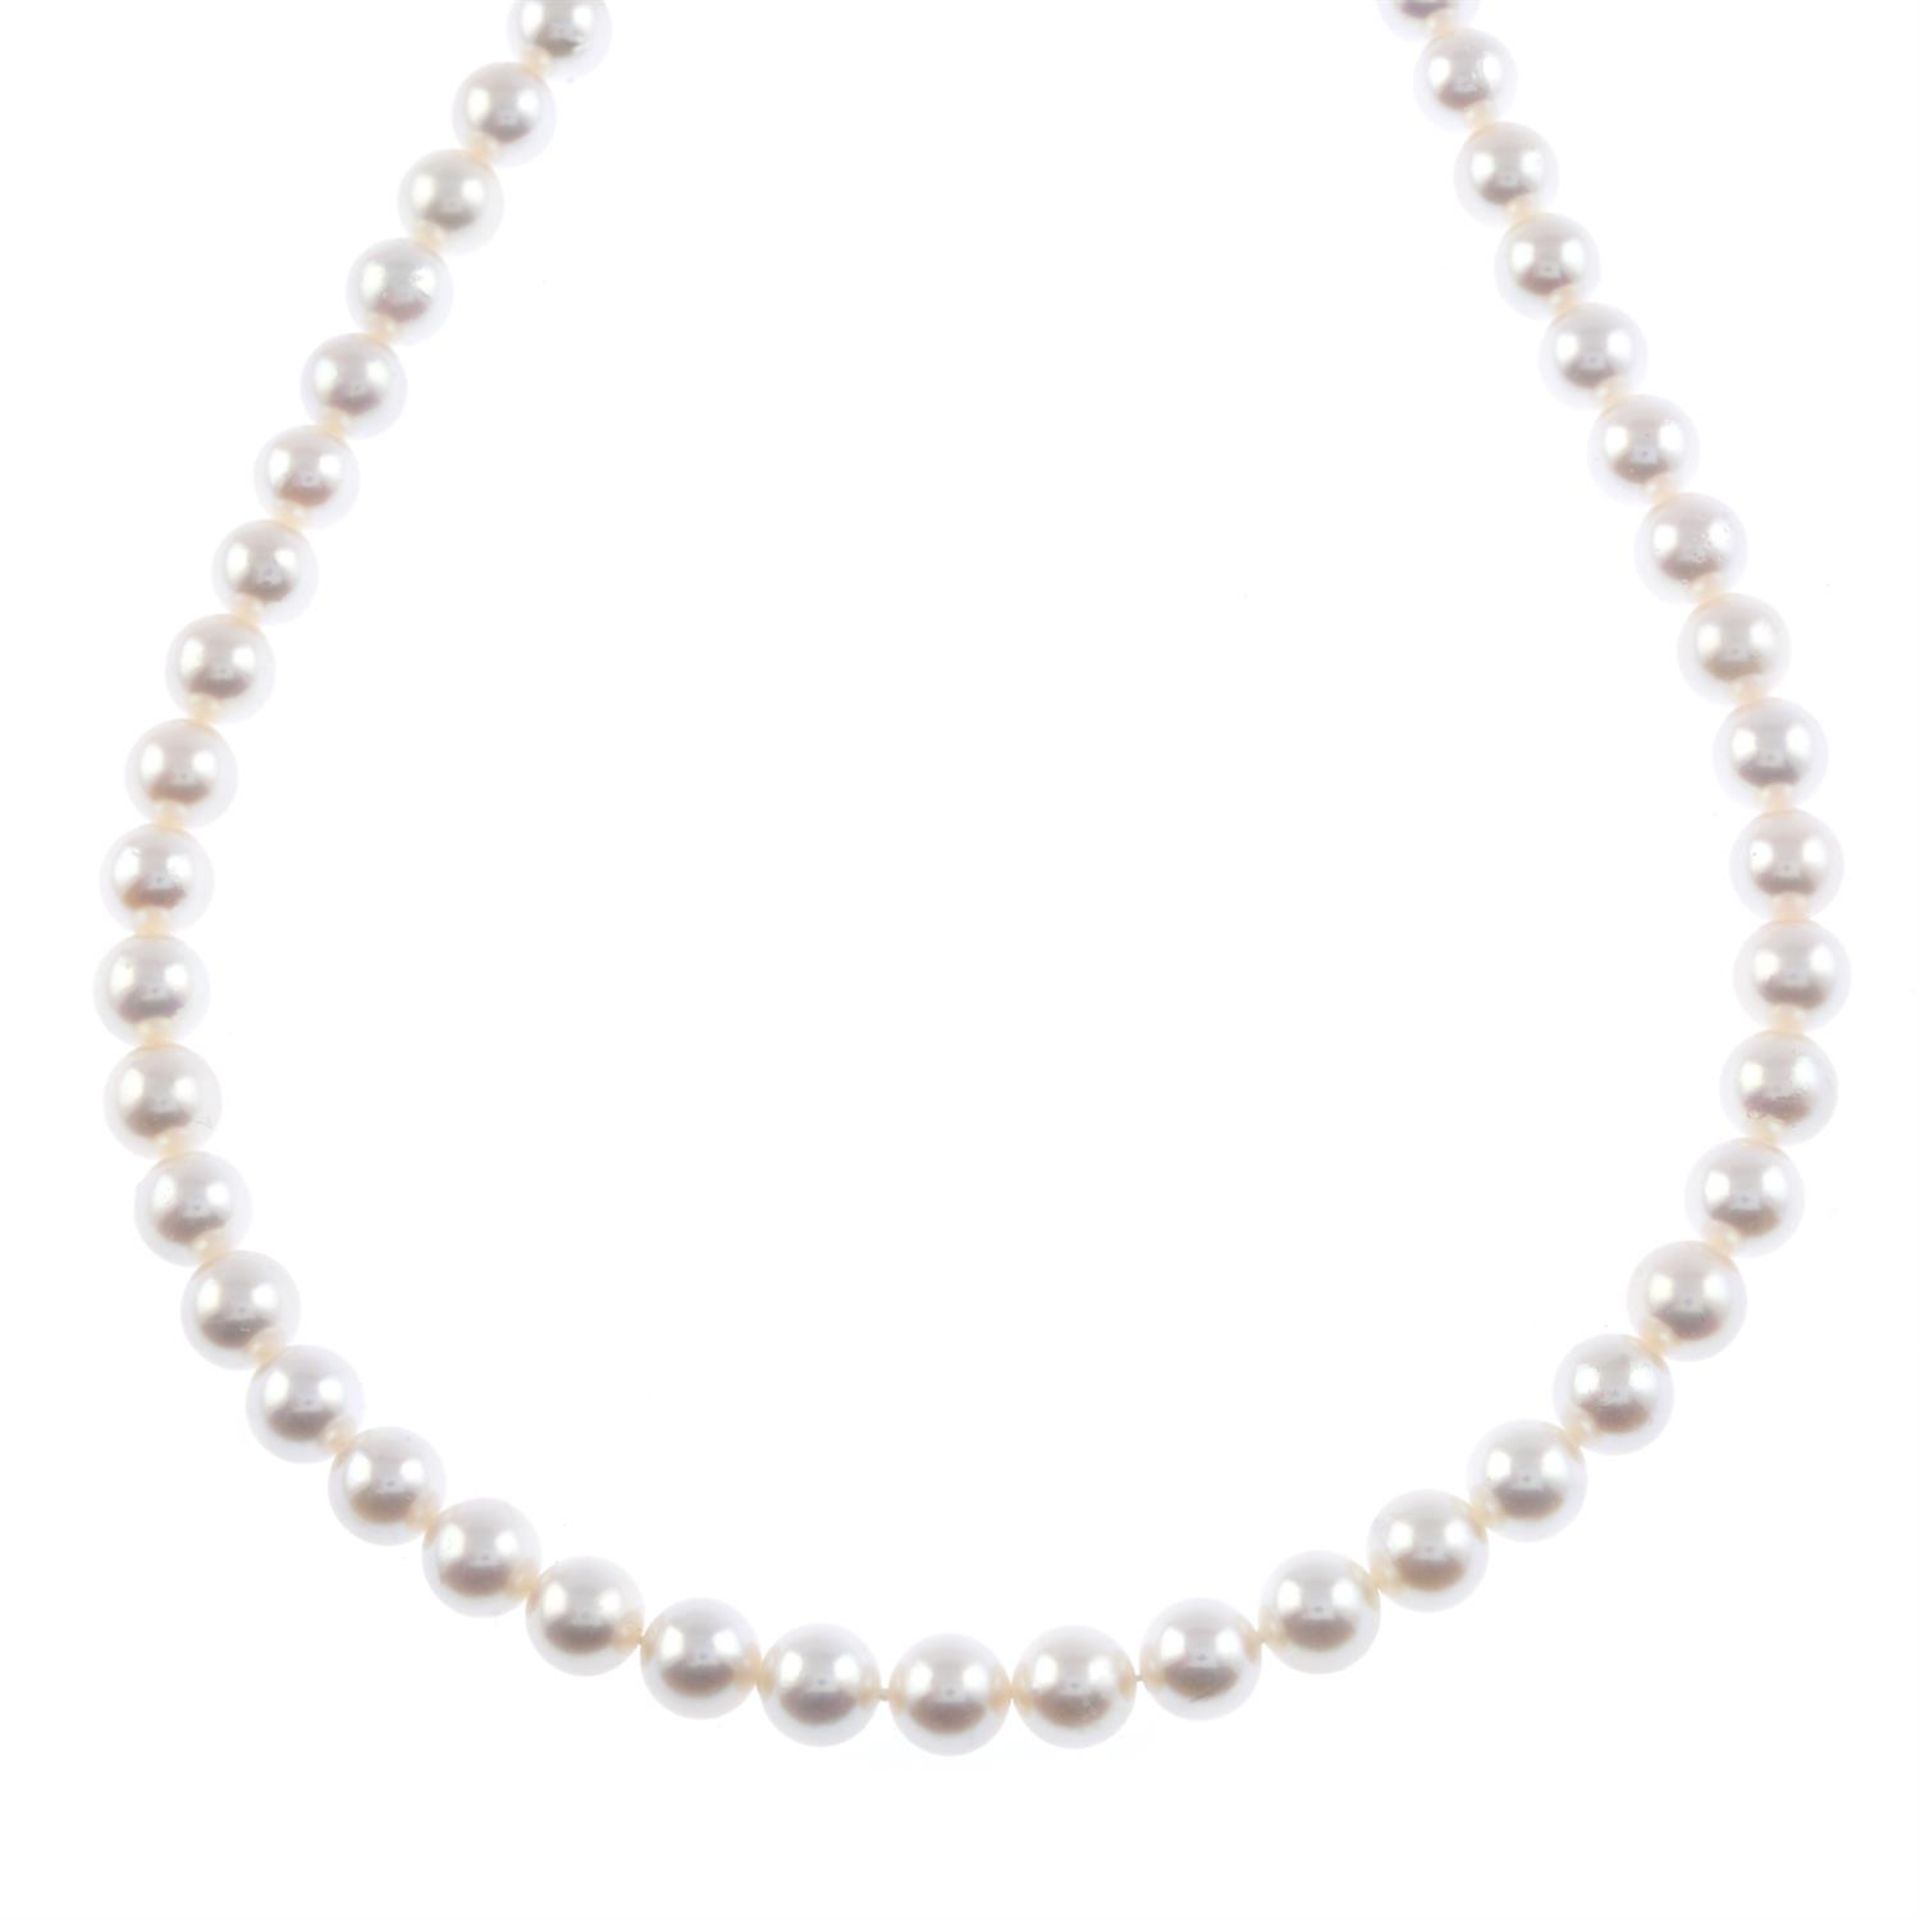 Cultured pearl single-strand necklace, by Schoeffel